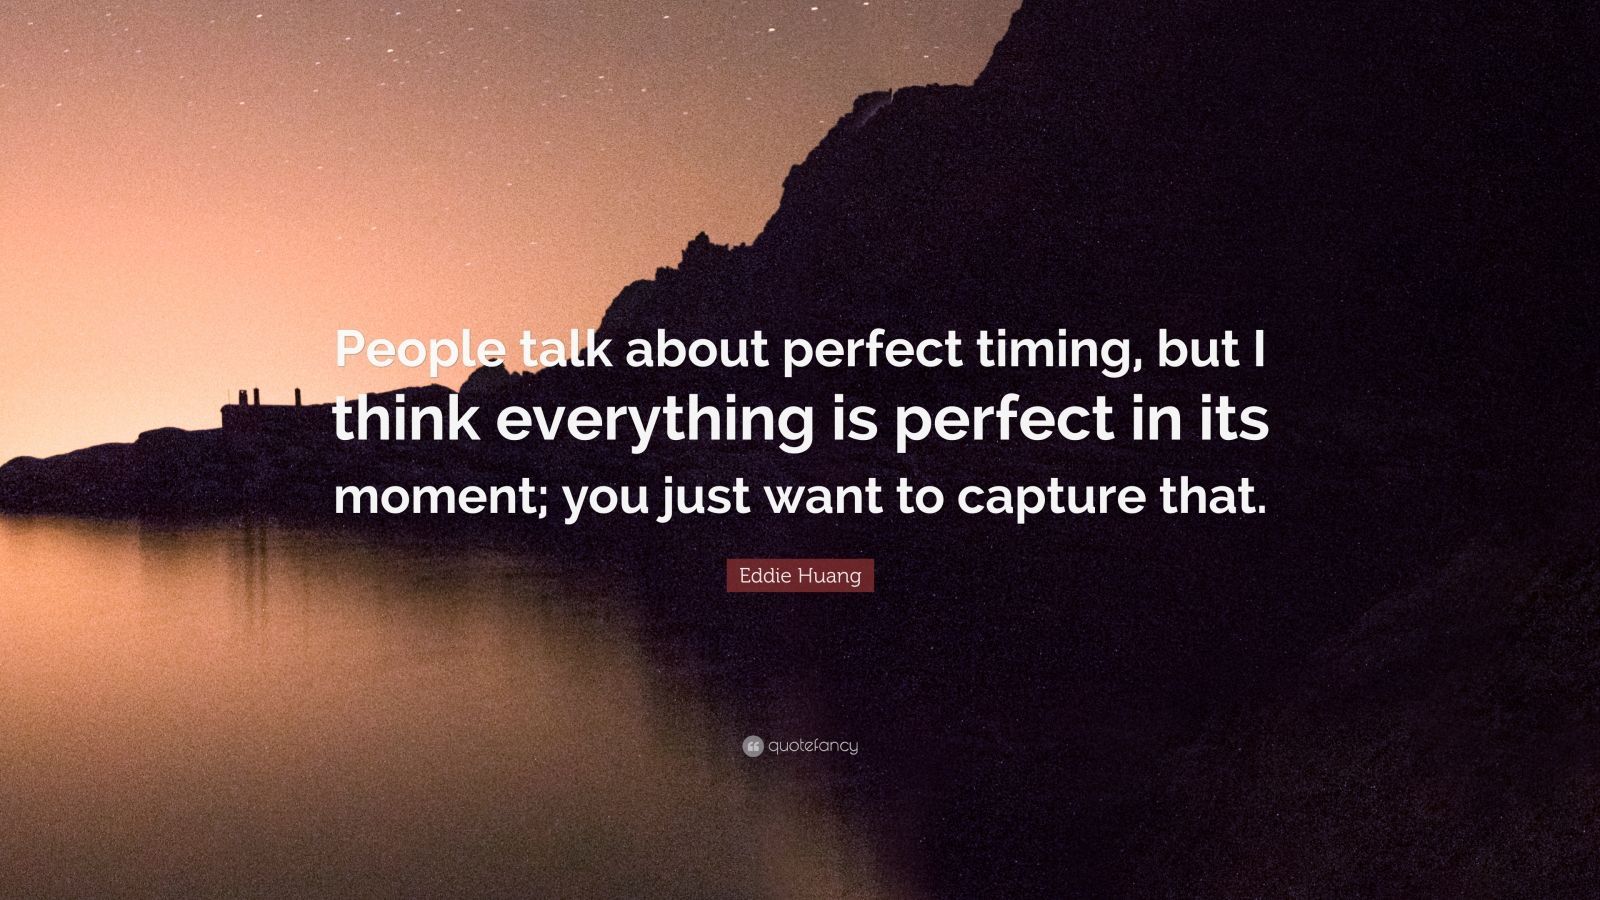 Eddie Huang Quote: “People talk about perfect timing, but I think everything is perfect in its moment; you just want to capture that.” (7 wallpaper)